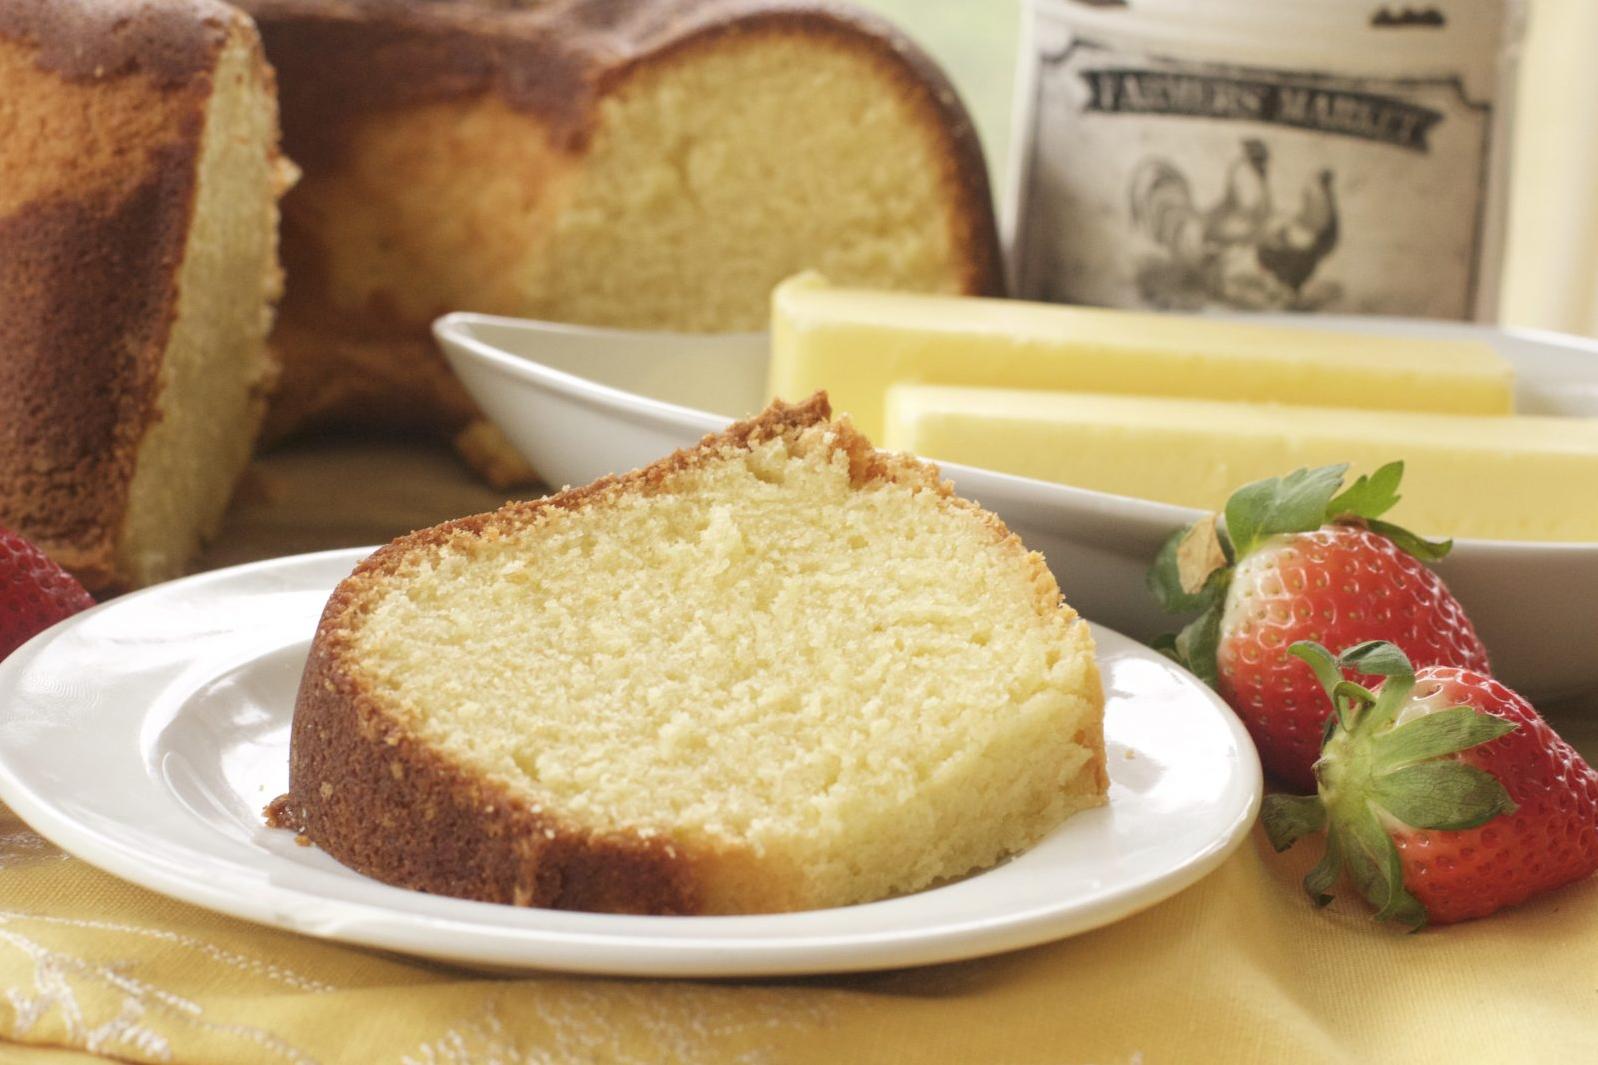  This buttery pound cake is a slice of heaven!